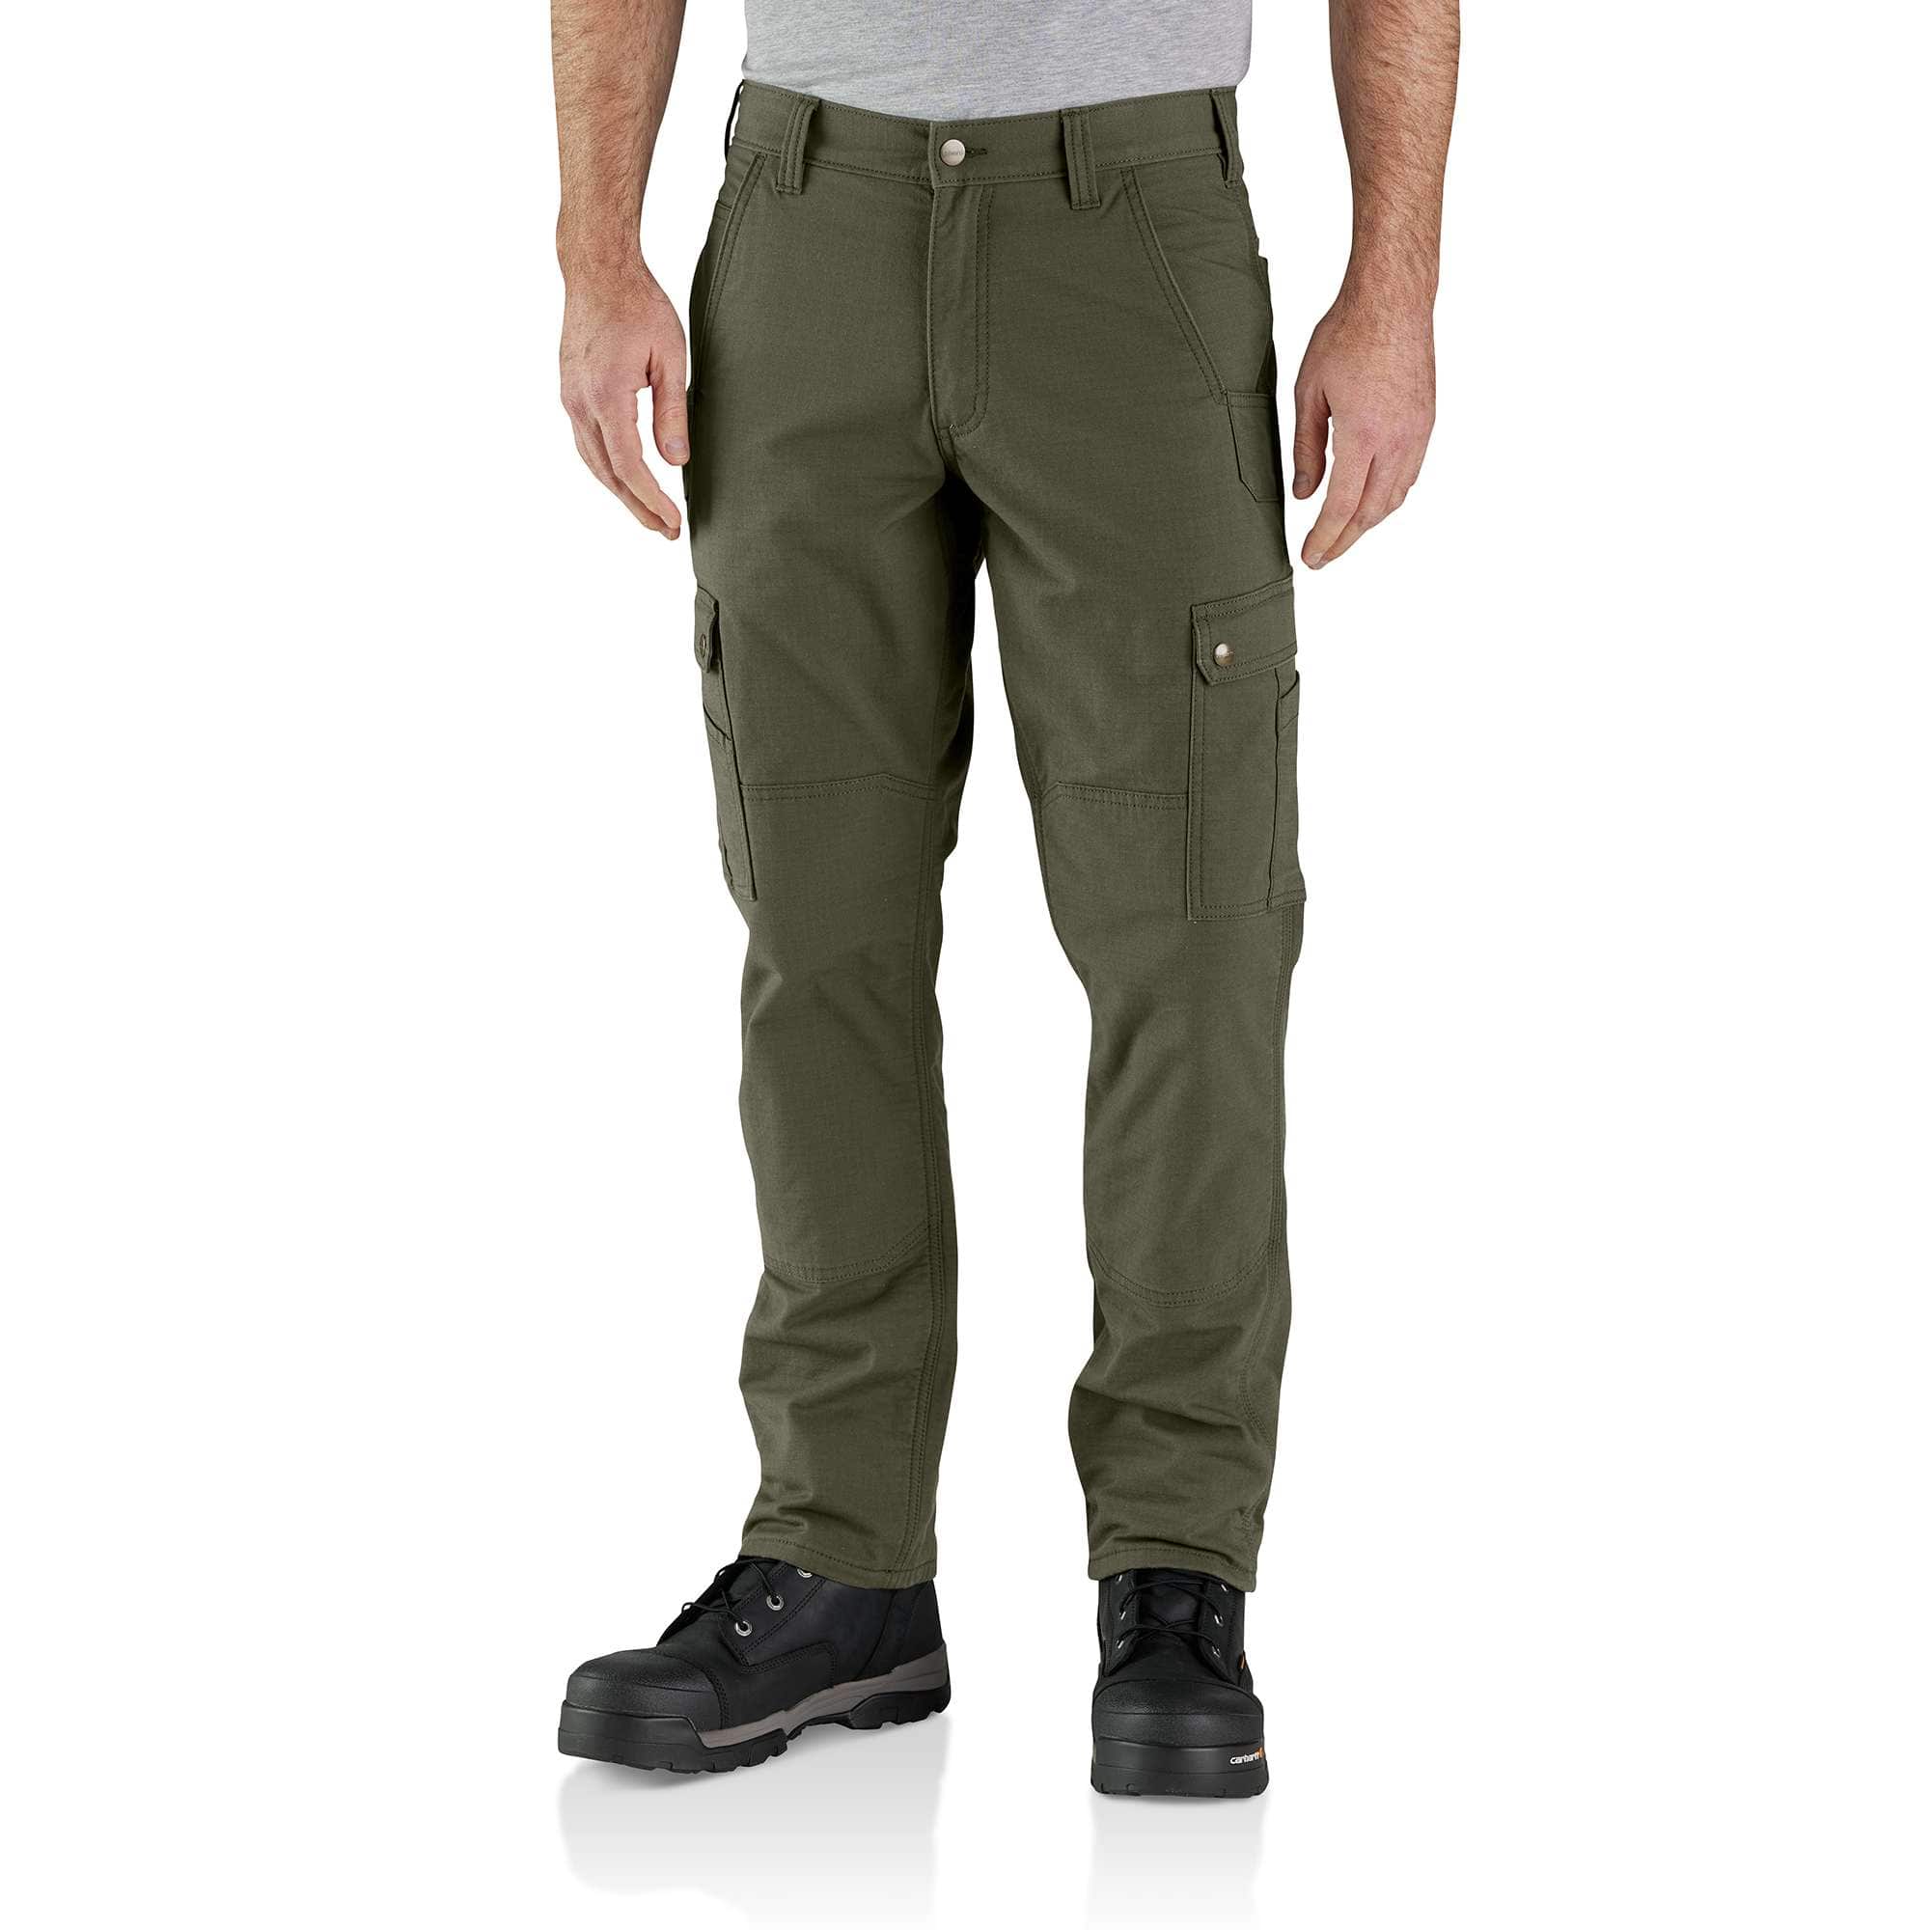 Pacifica Olive 3/4 Cargo Pants - Lowes Menswear